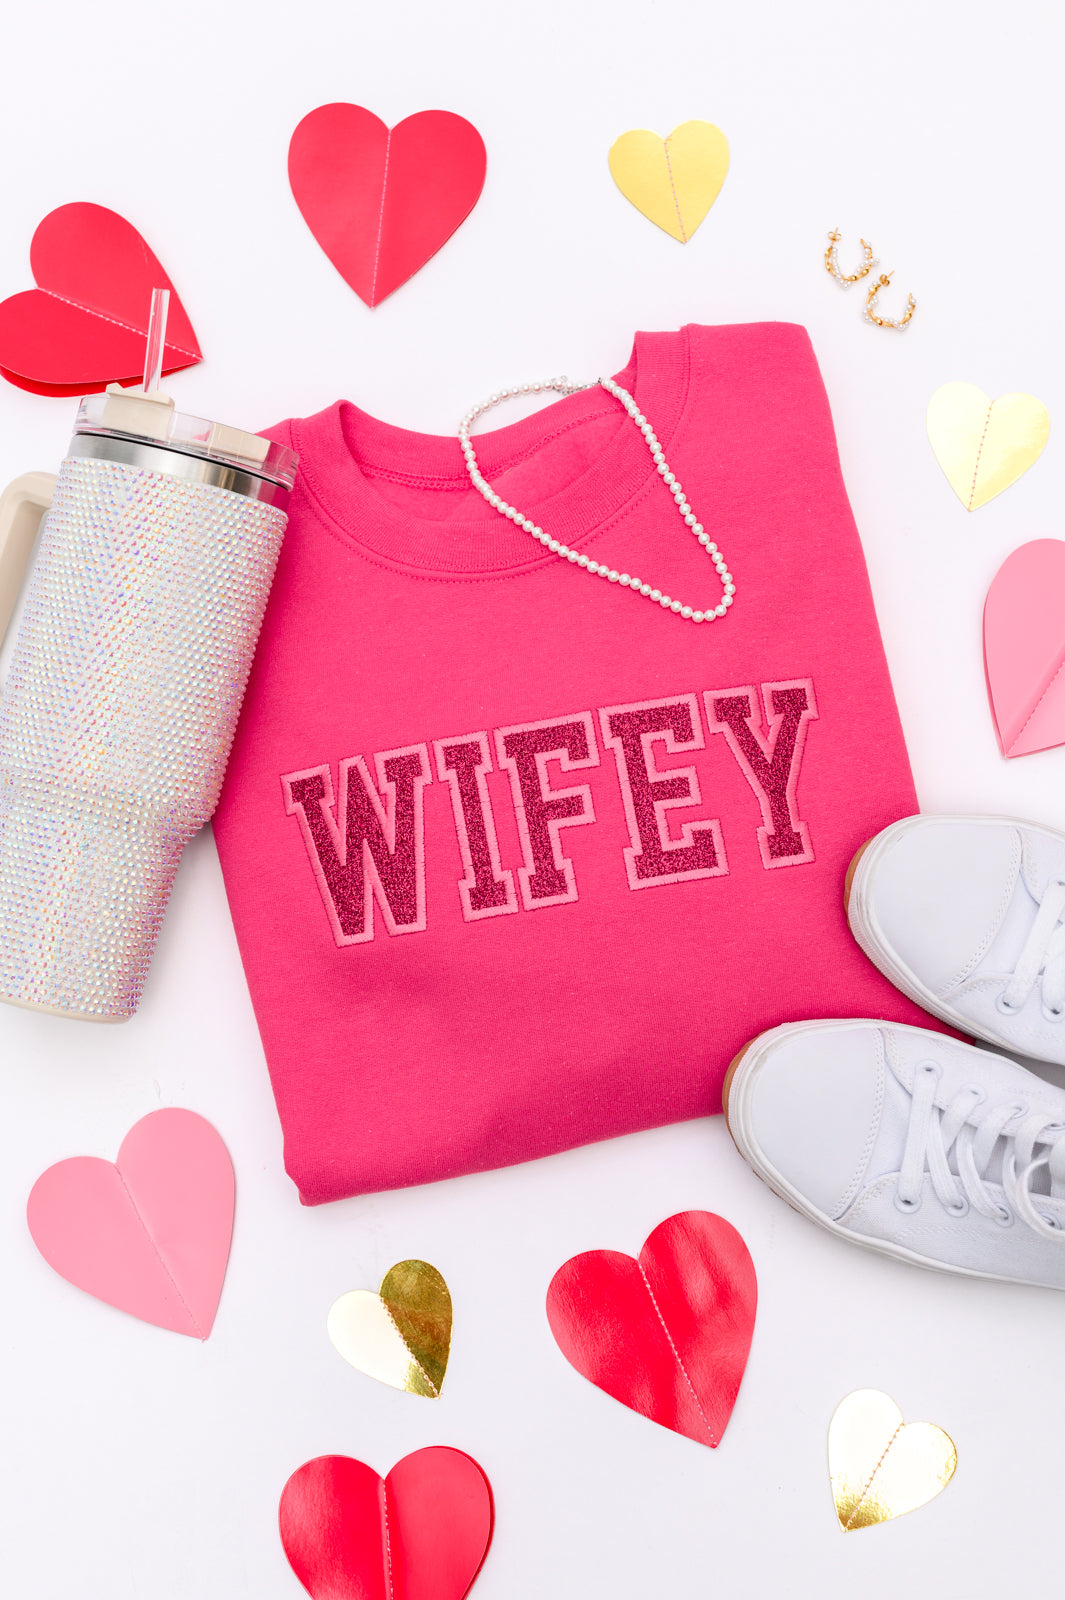 PREORDER: Embroidered Wifey Glitter Sweatshirt in Four Colors